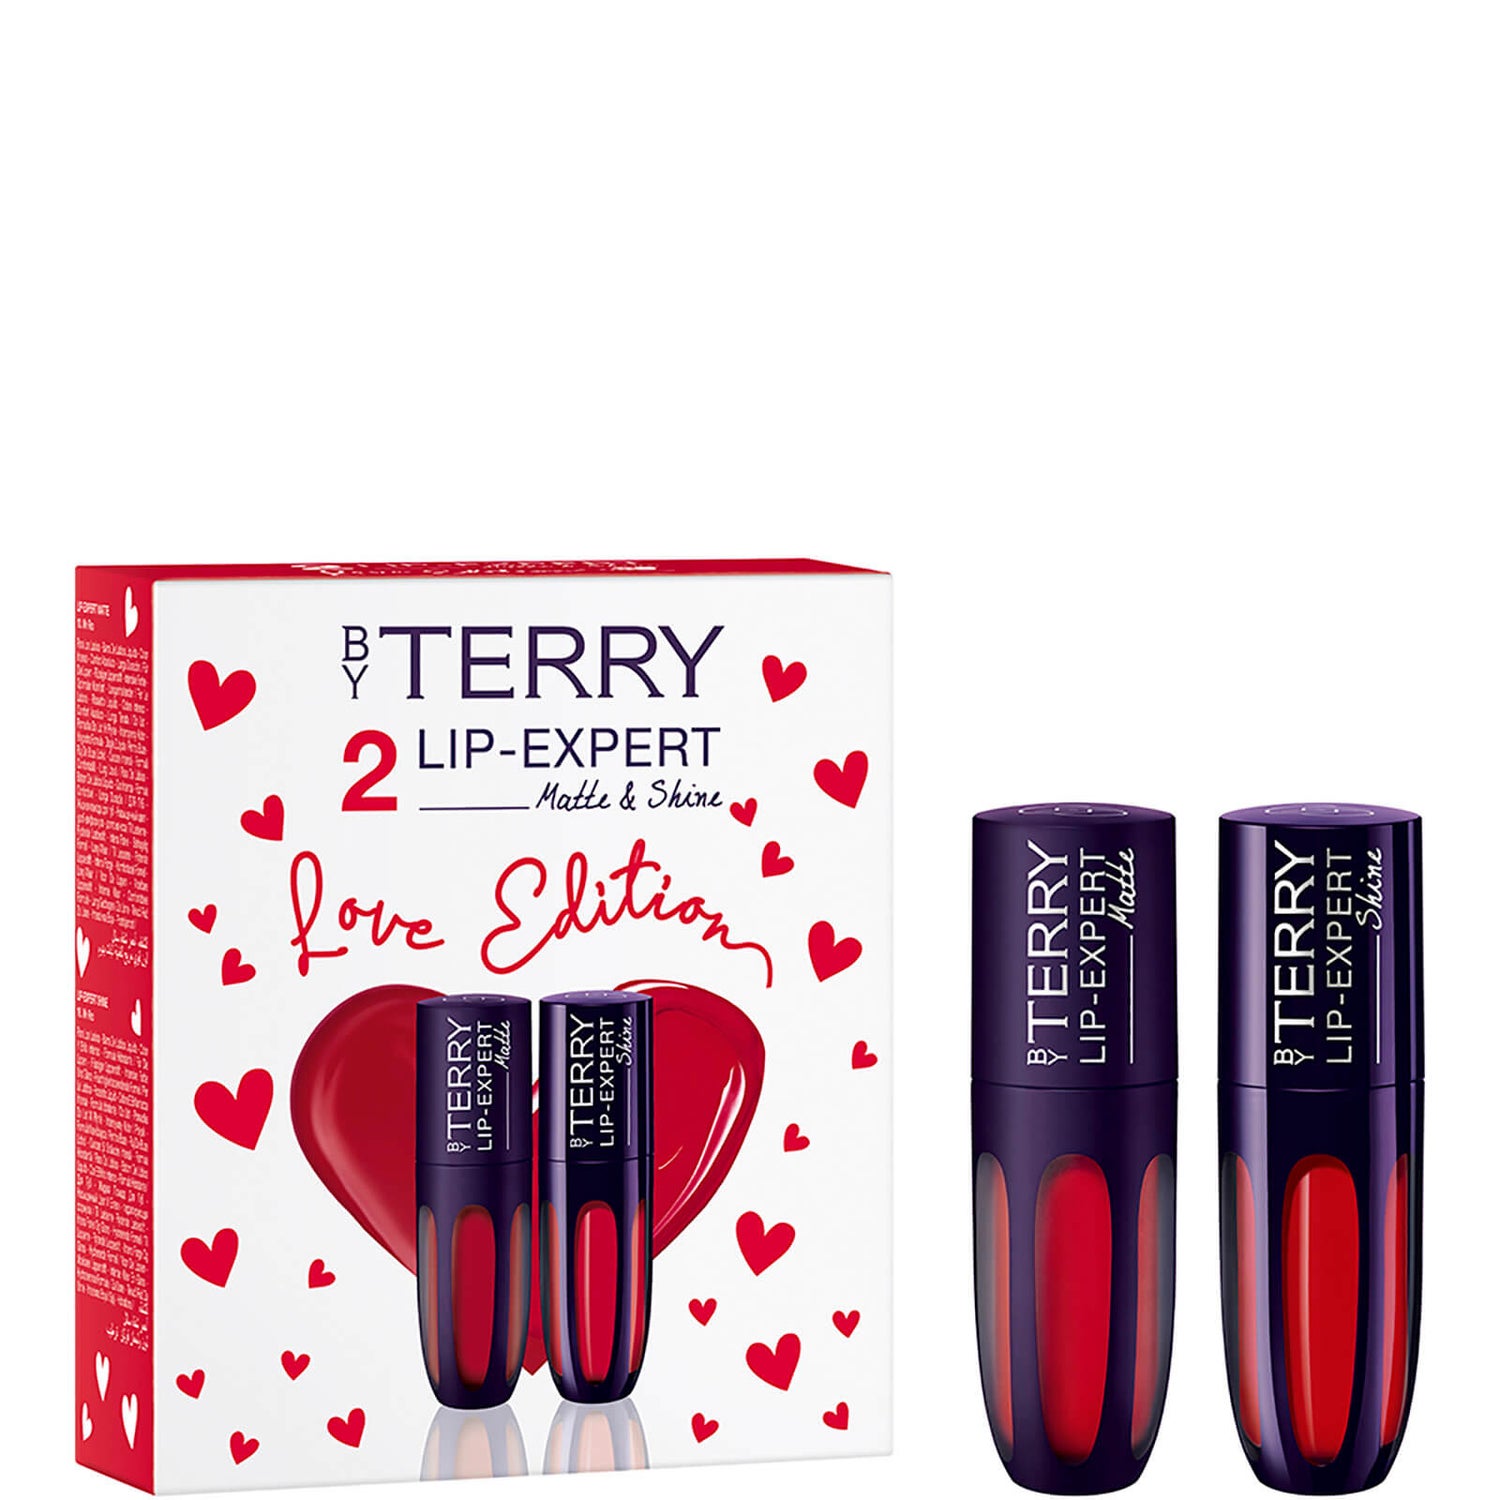 By Terry Lip-Expert Duo Set (Worth £58.00)